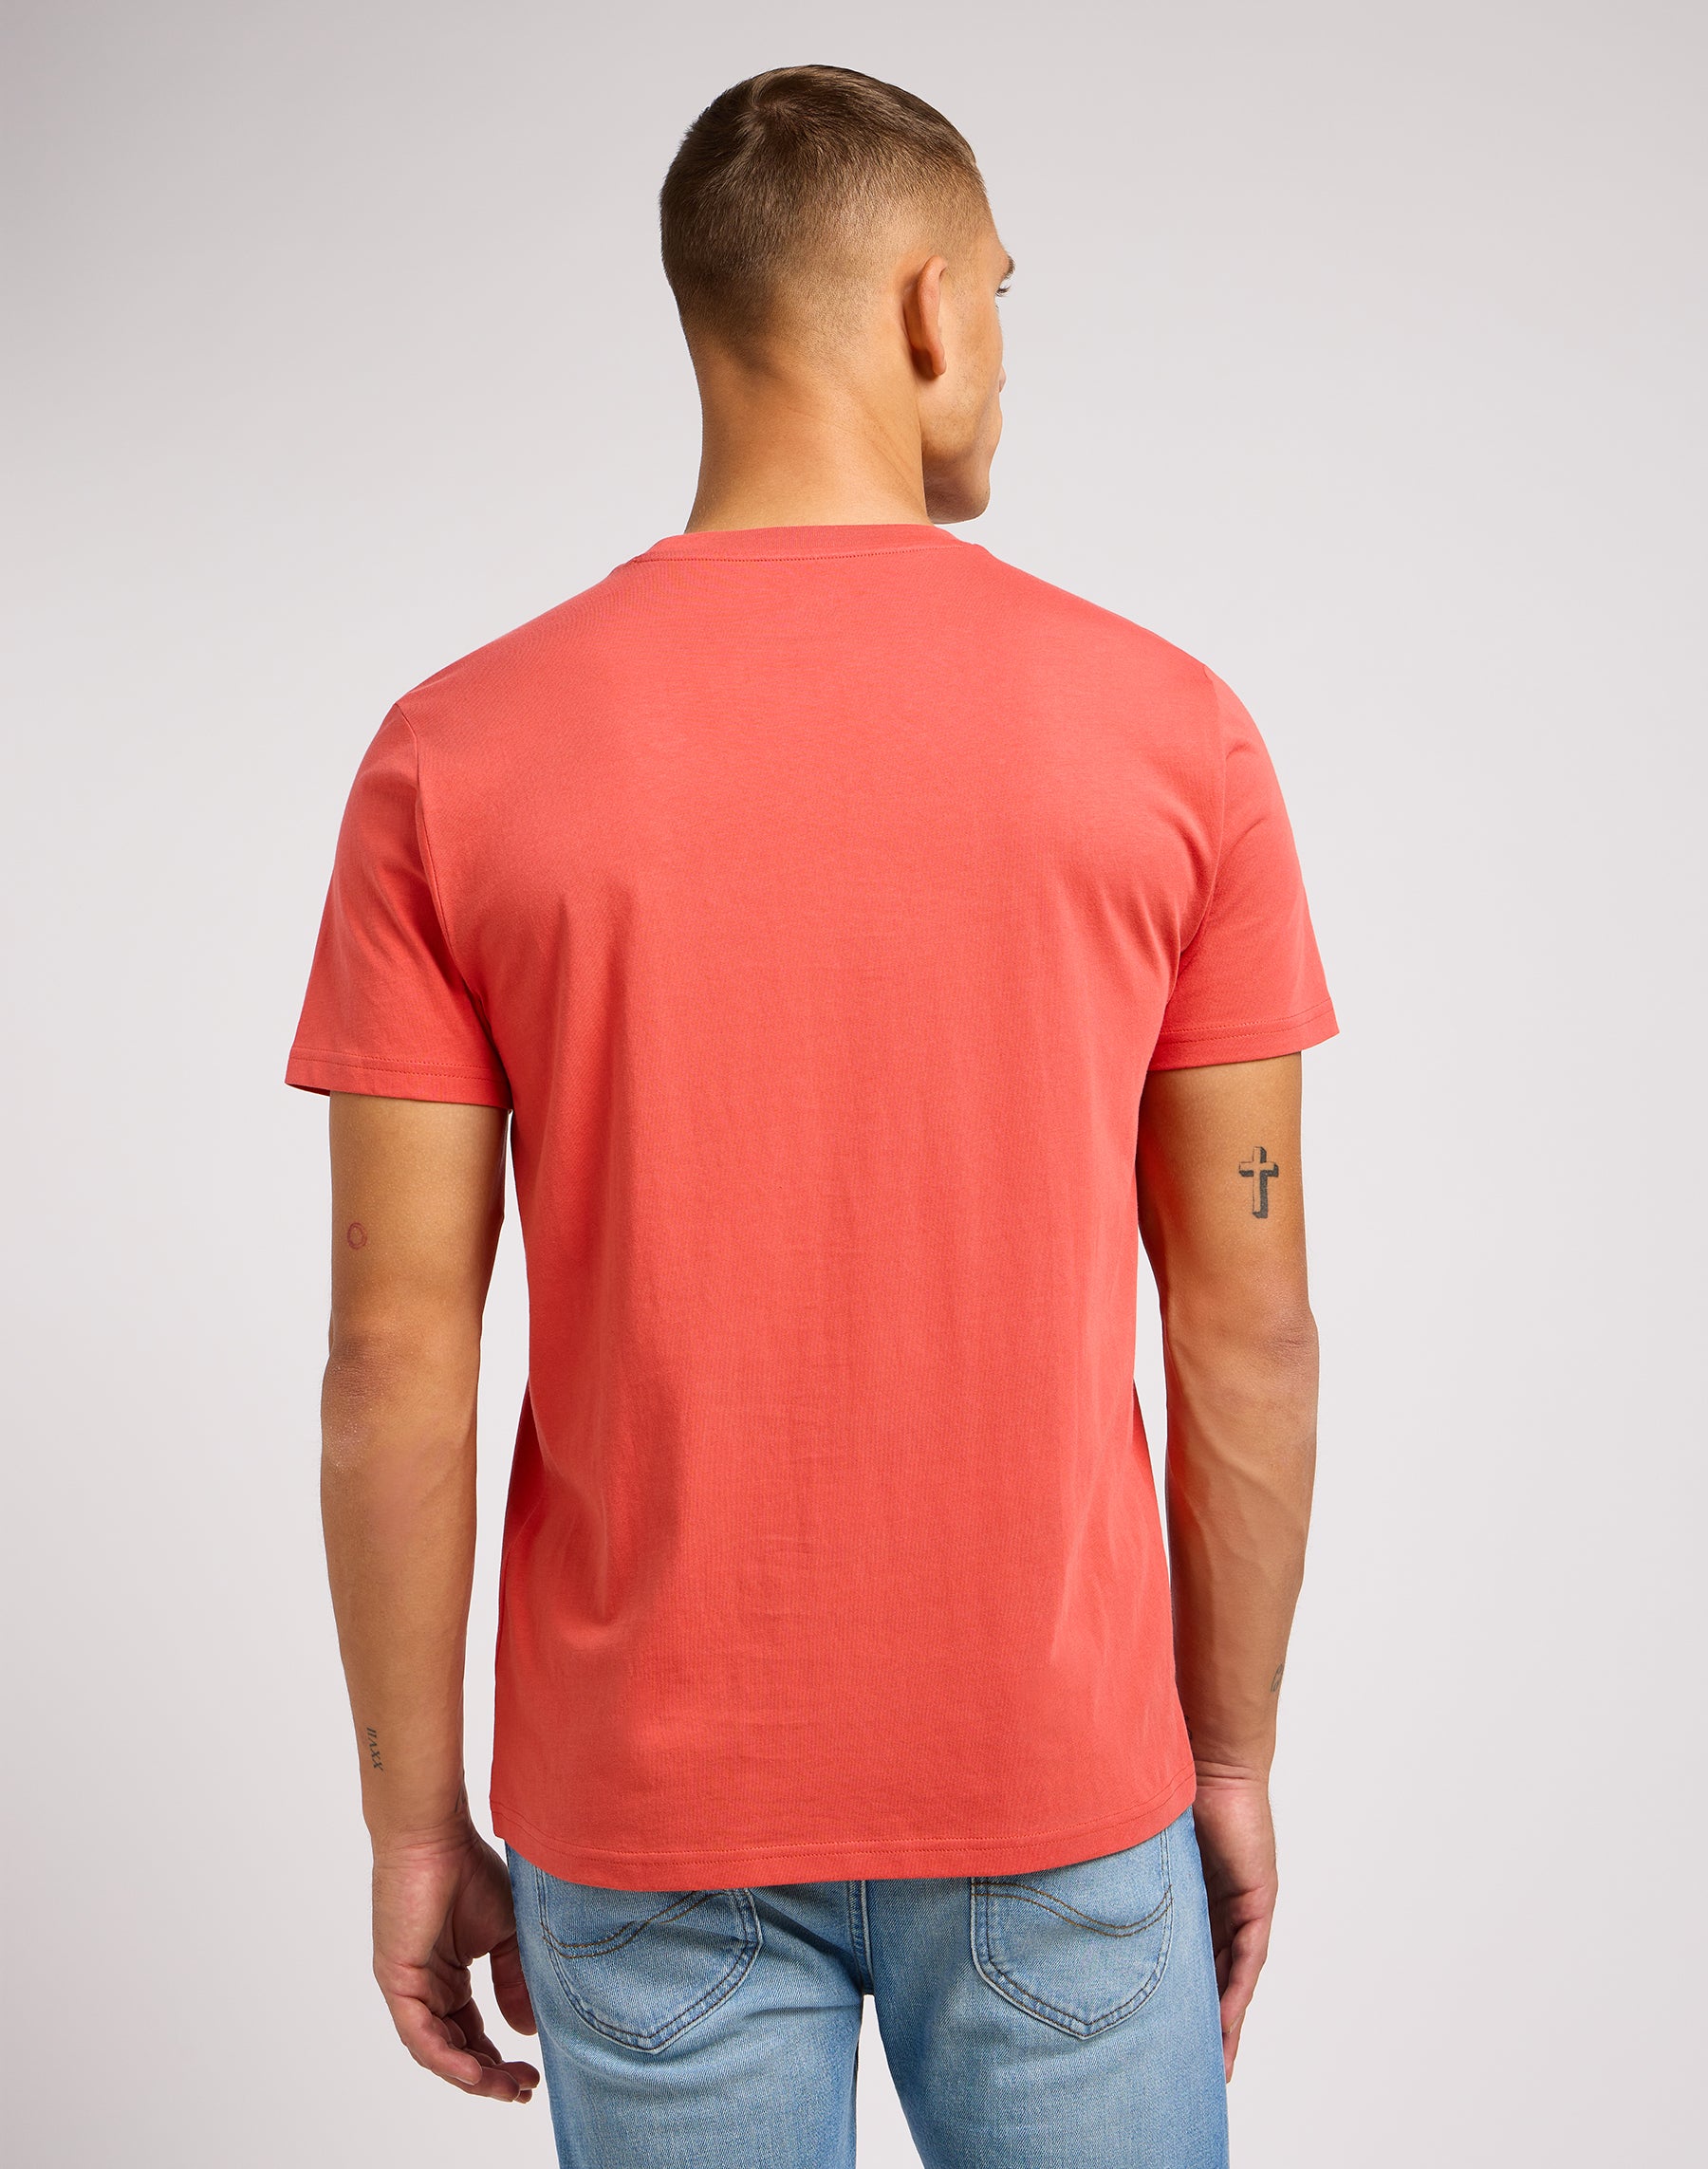 Shortsleeves Patch Logo Tee in Poppy T-Shirts Lee   